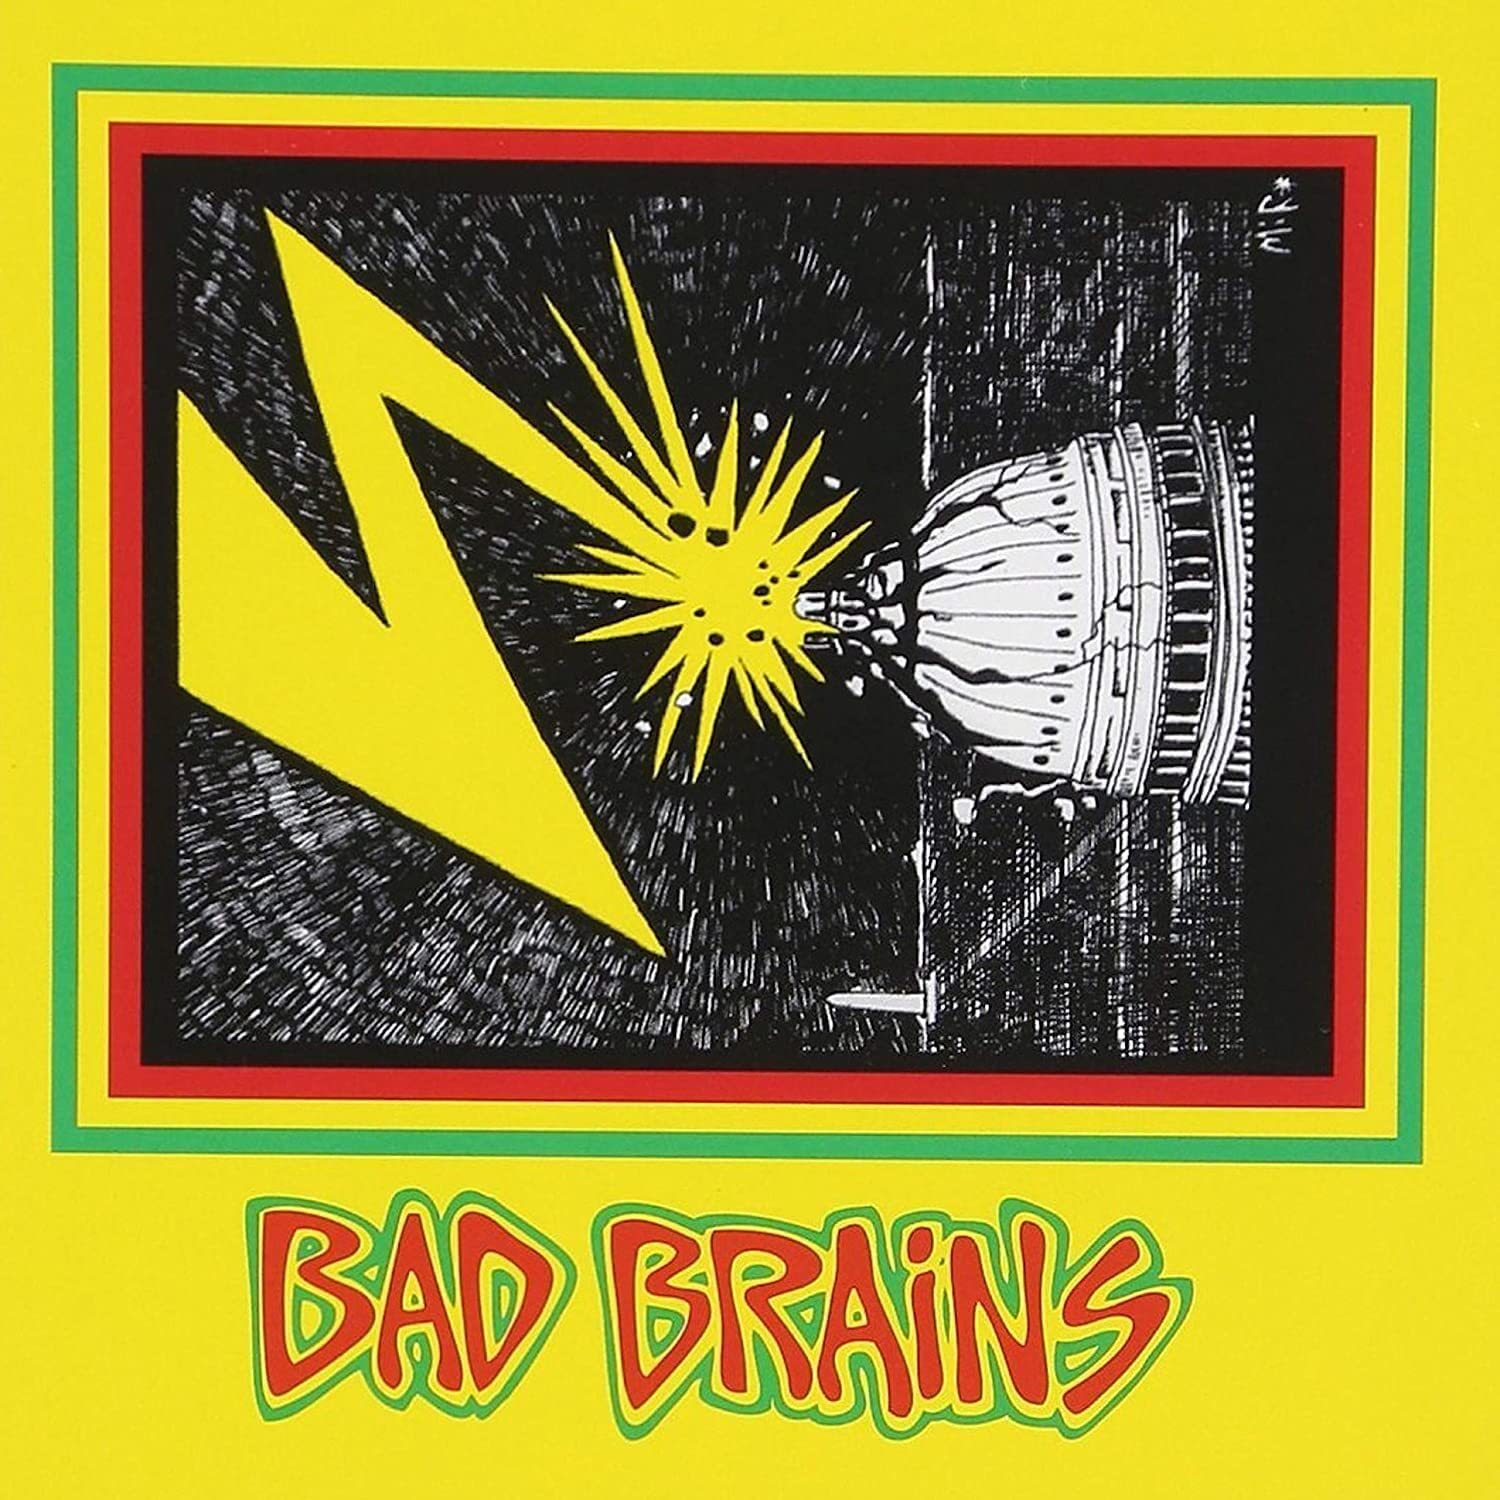 Cover of Bad Brains self-titled album